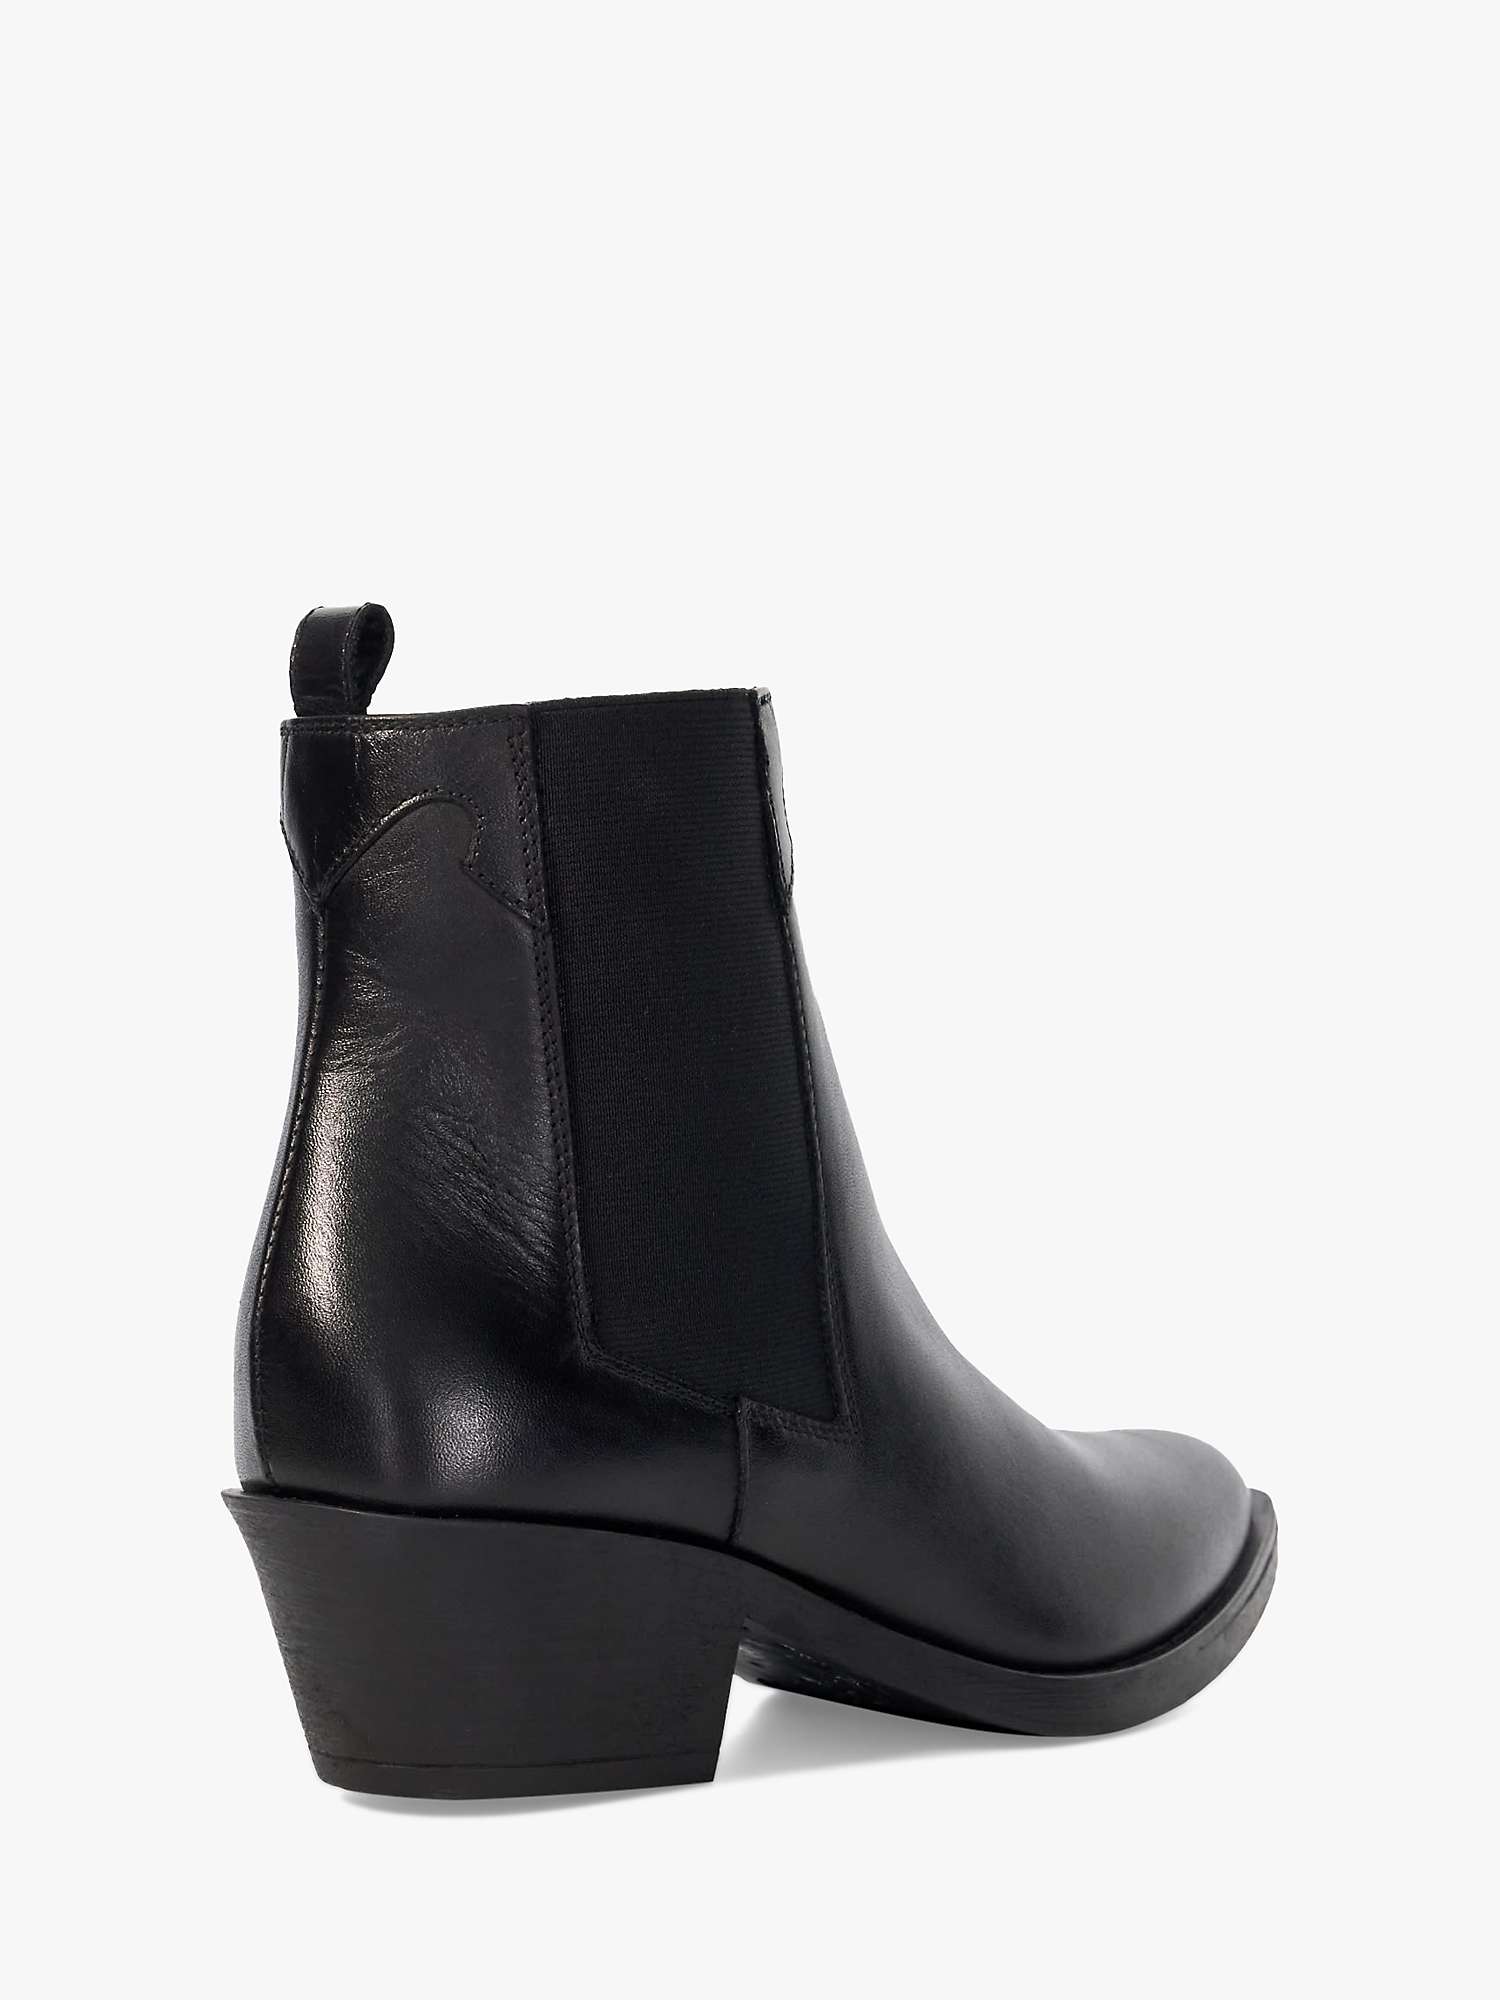 Buy Dune Patoka Leather Western Boots, Black Online at johnlewis.com